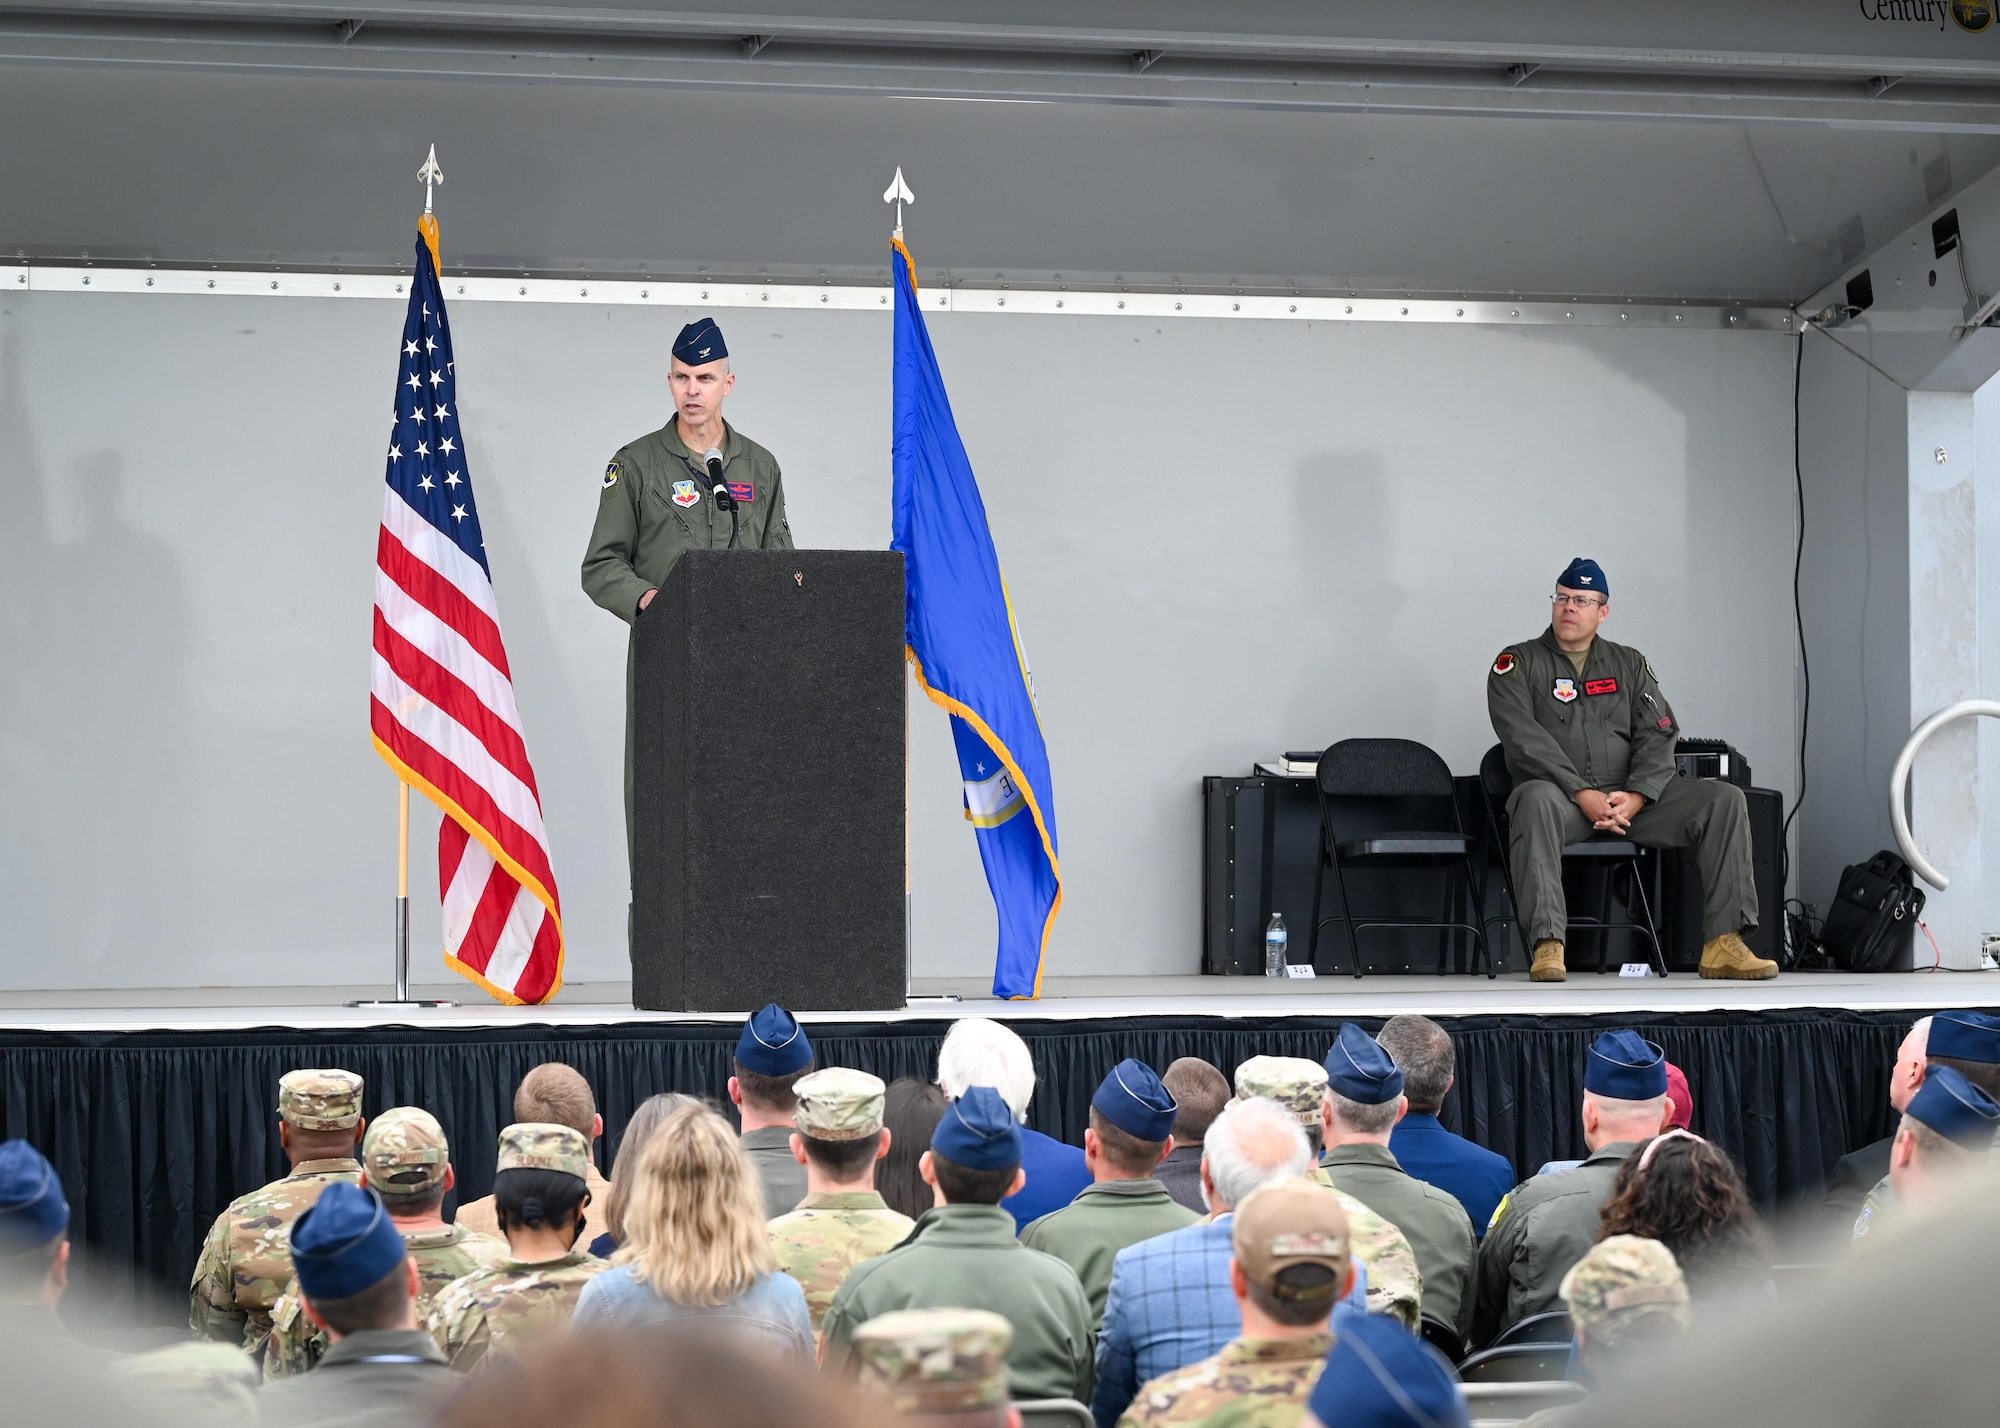 Colonel Merrell delivers a speech to an audience.